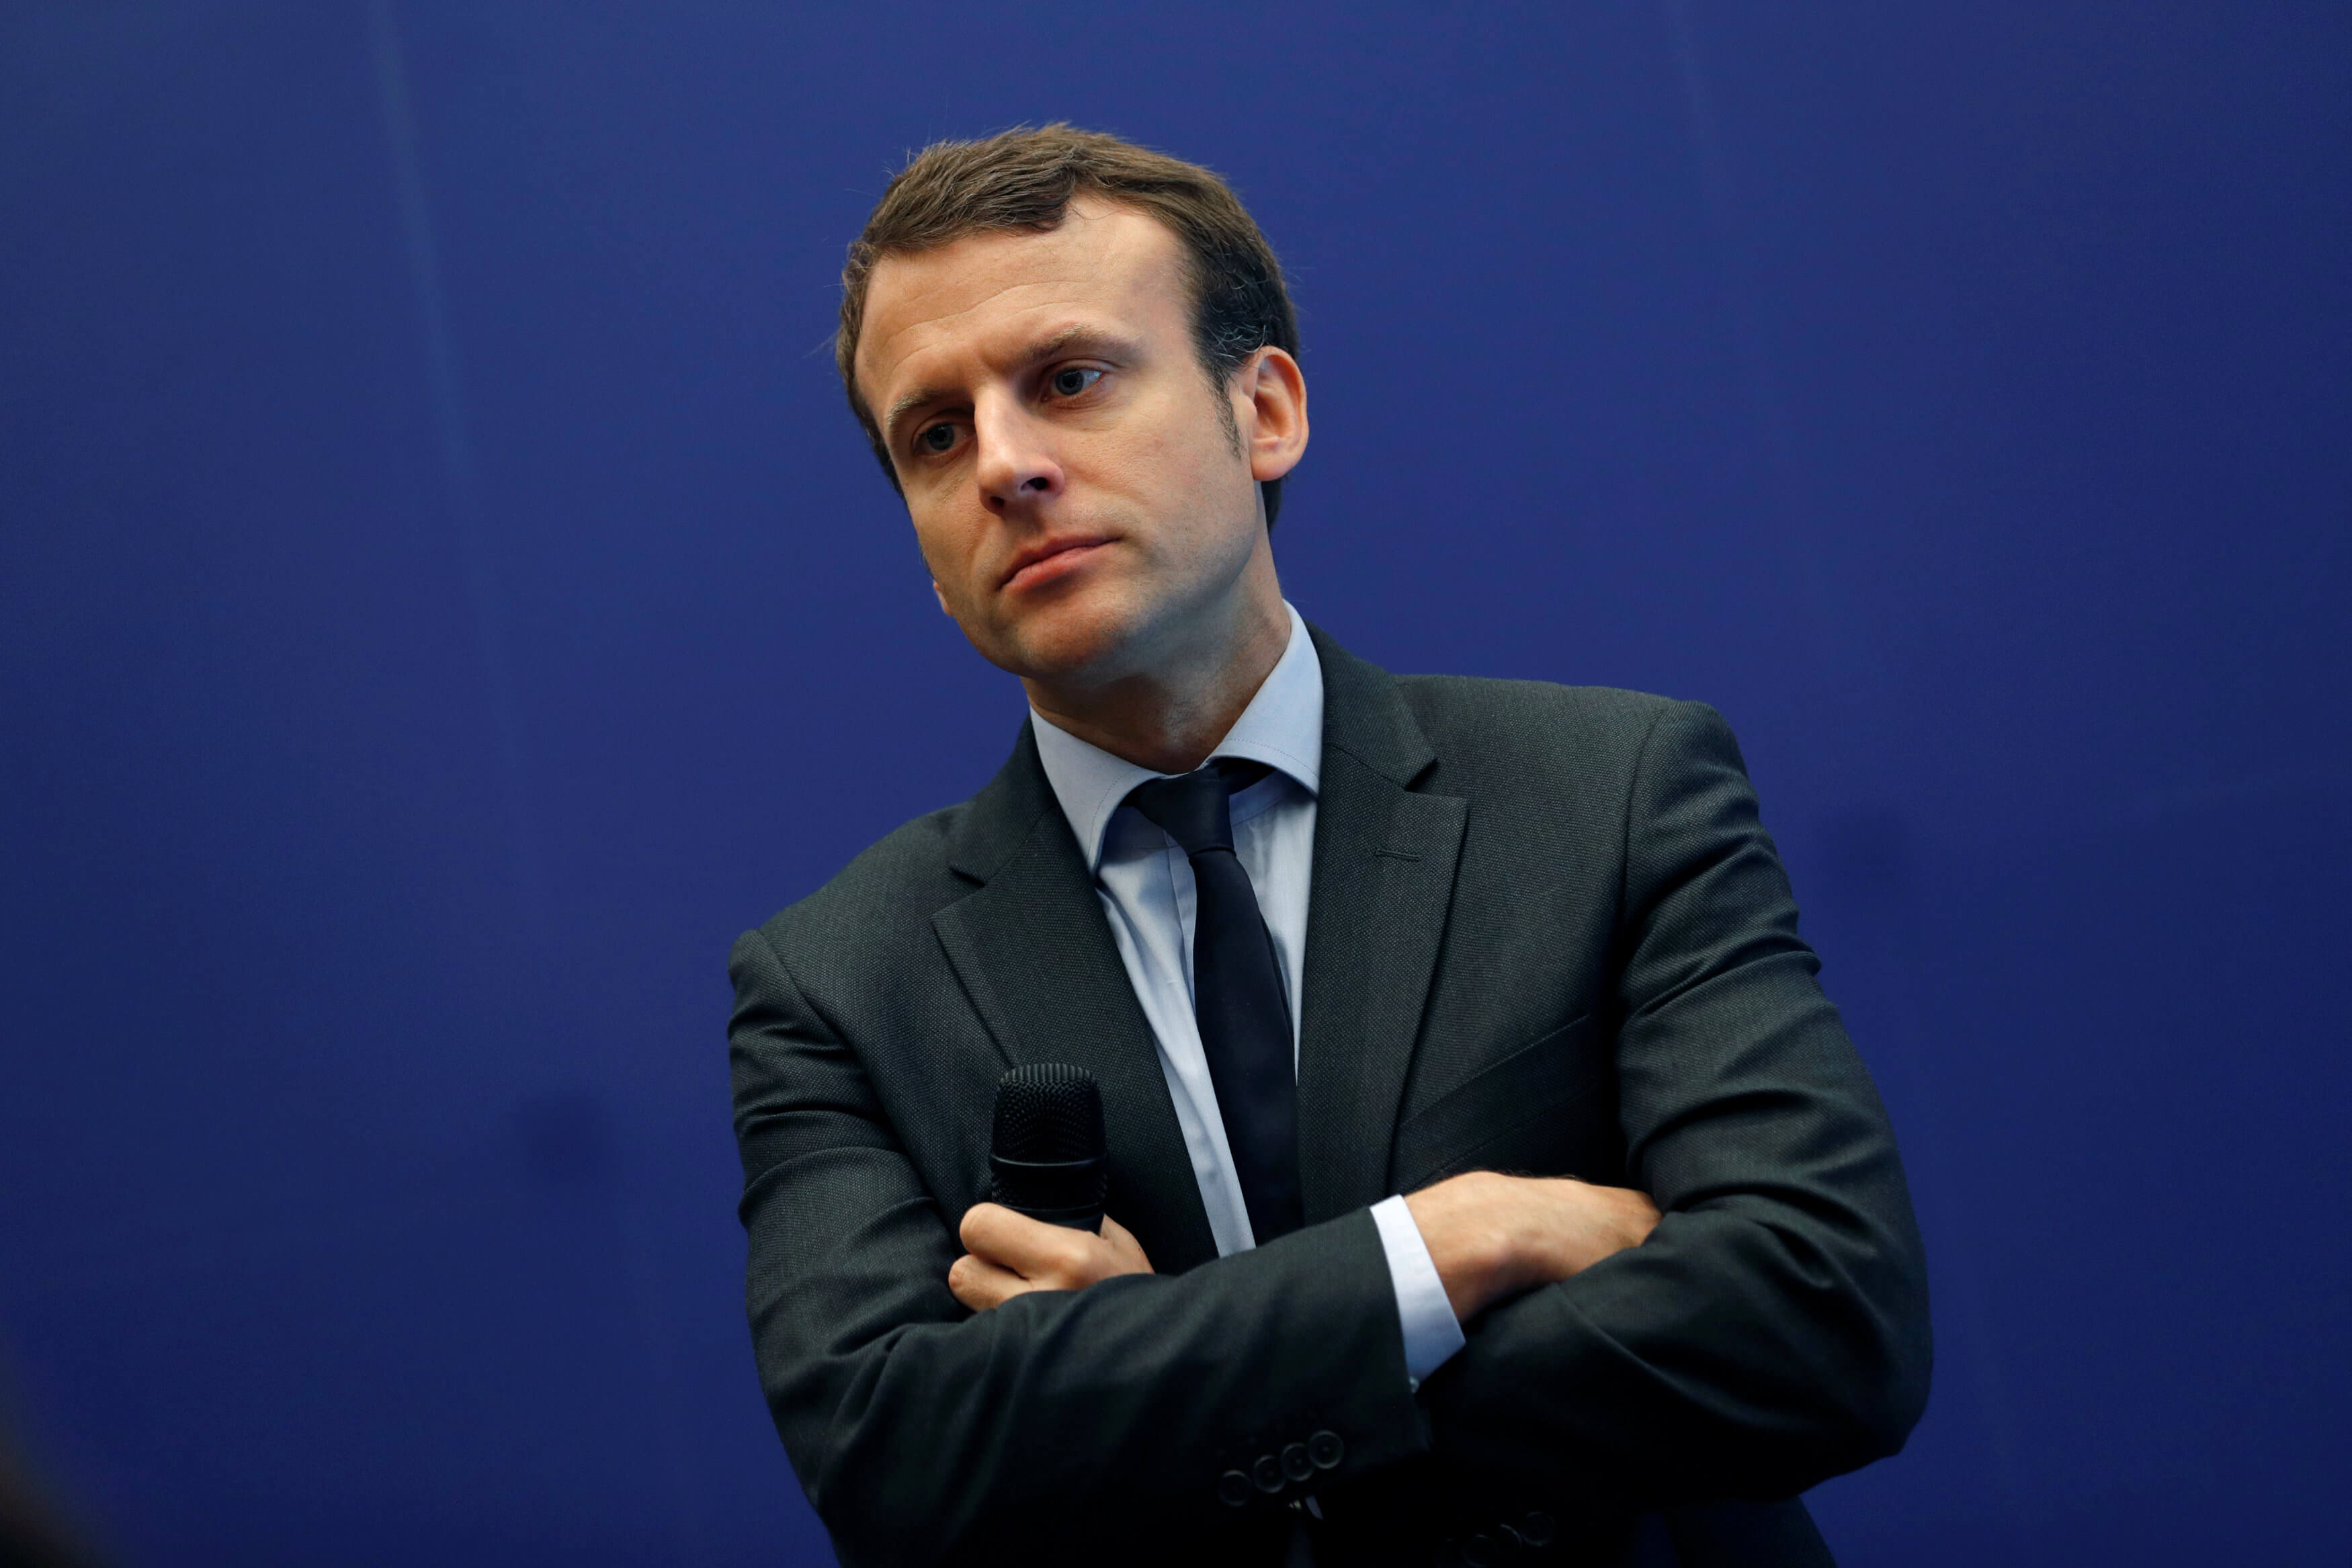 Photograph of Emmanuel Macron in 2016, at the time minister for the economy and digital affairs